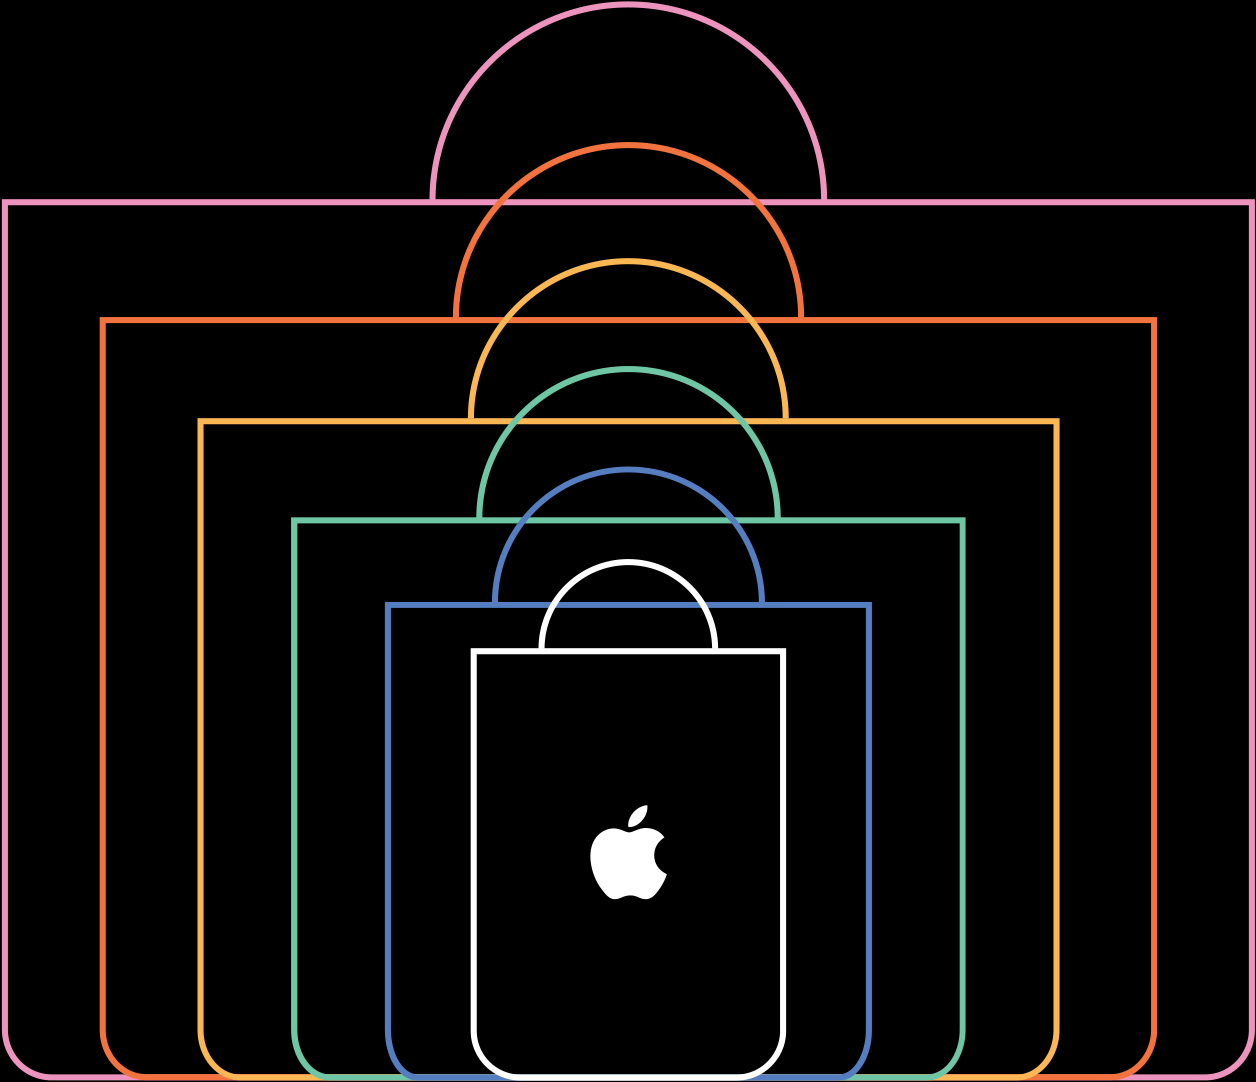 Shopping bag outlines in rainbow colors, expanding in size, Apple logo centered in white